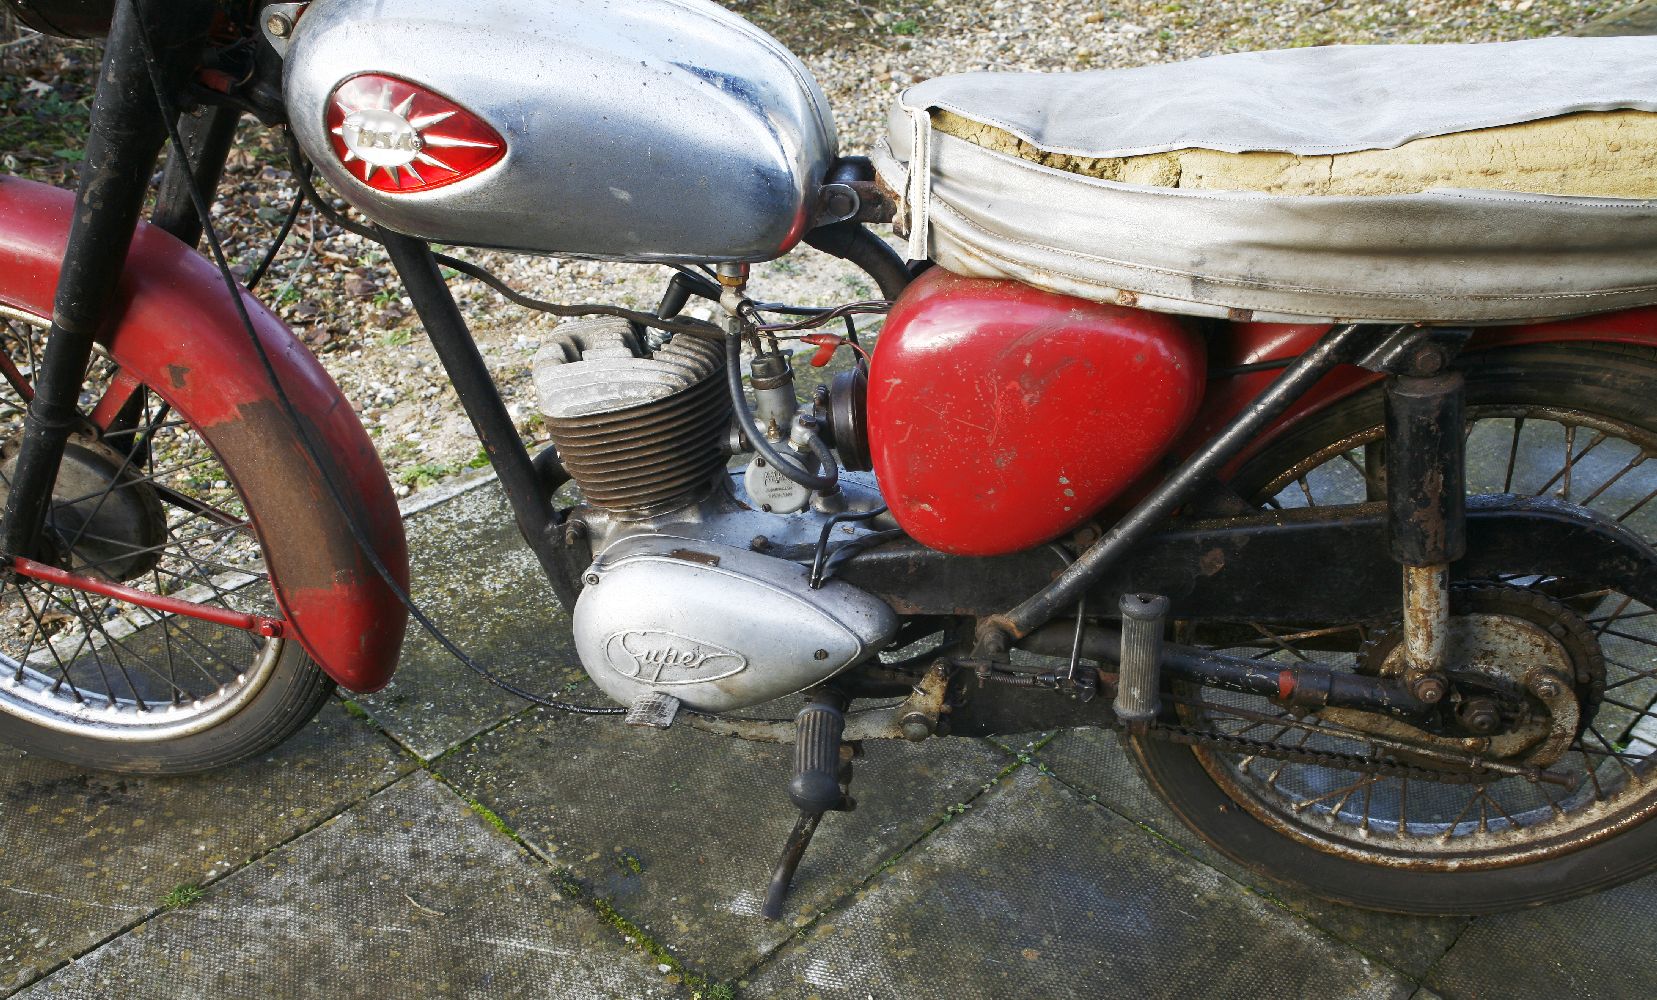 BSA Bantam D7 175 (believed to be 1961) motorcycle,registration number THV 872, no papers, missing - Image 5 of 11